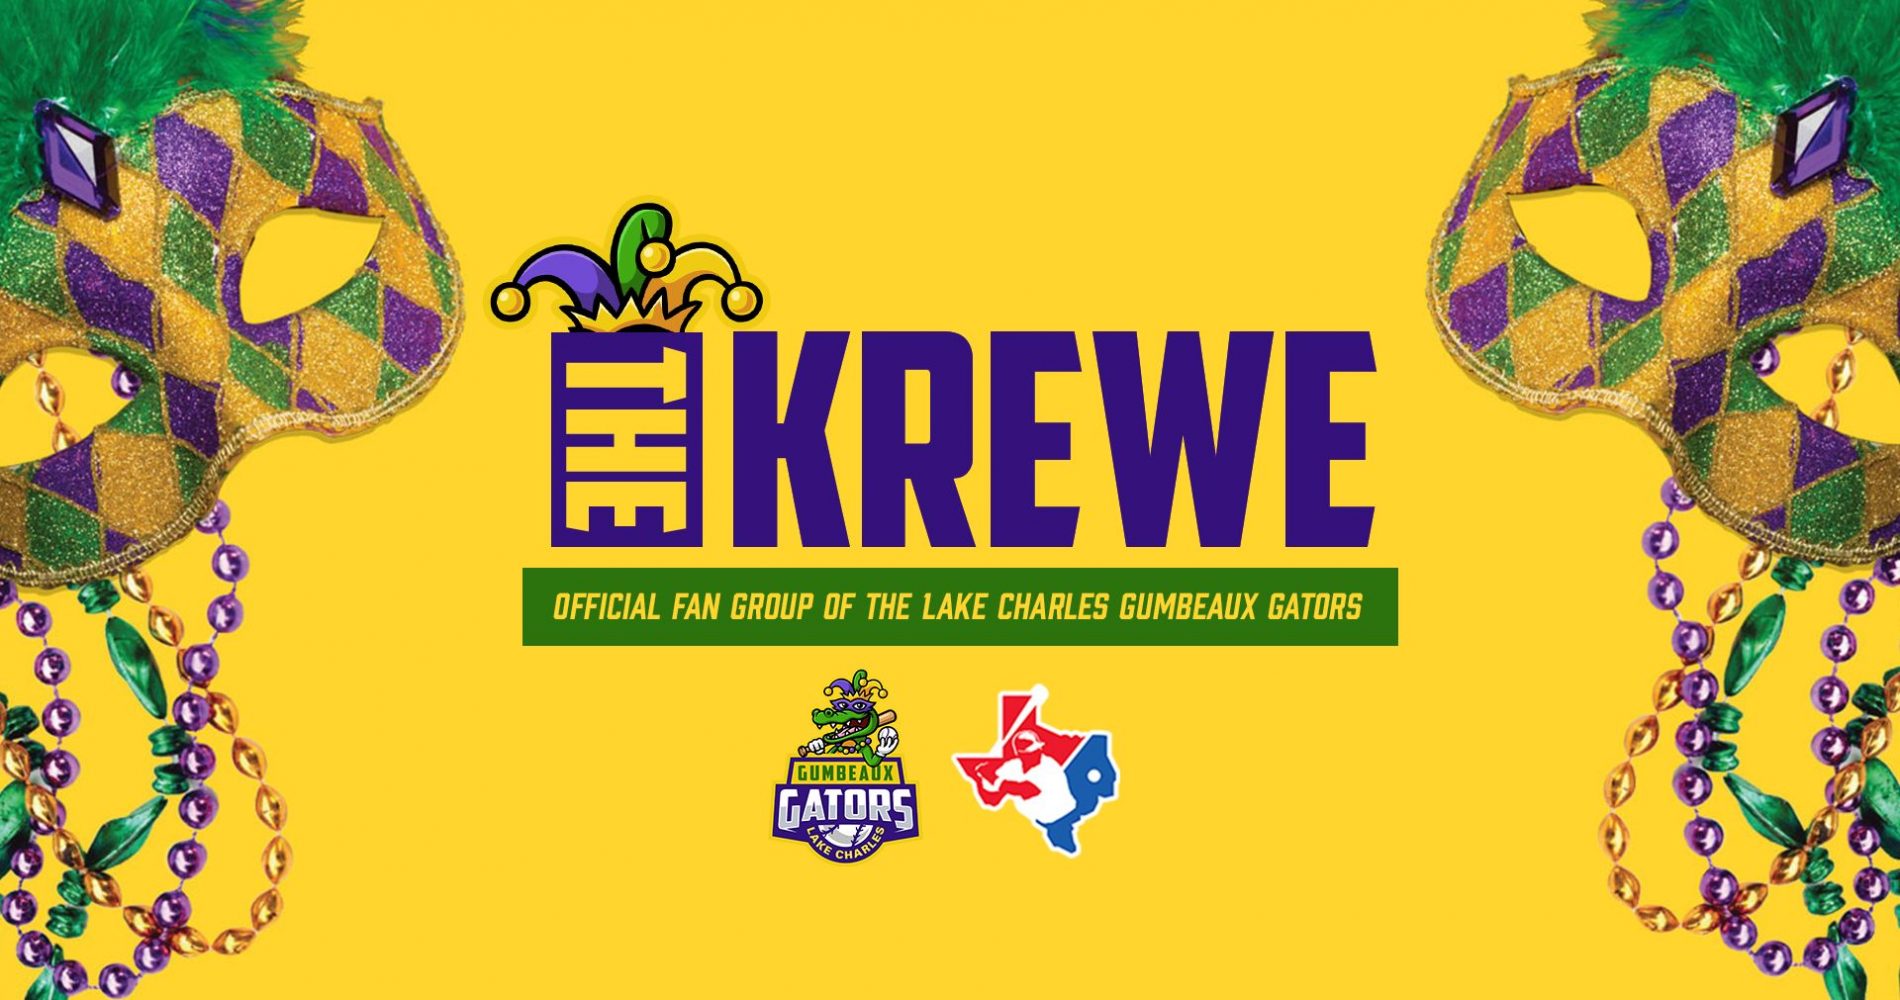 Introducing “The Krewe” – The Official Fan Group of Lake Charles’ Hometown Team, the Gumbeaux Gators!